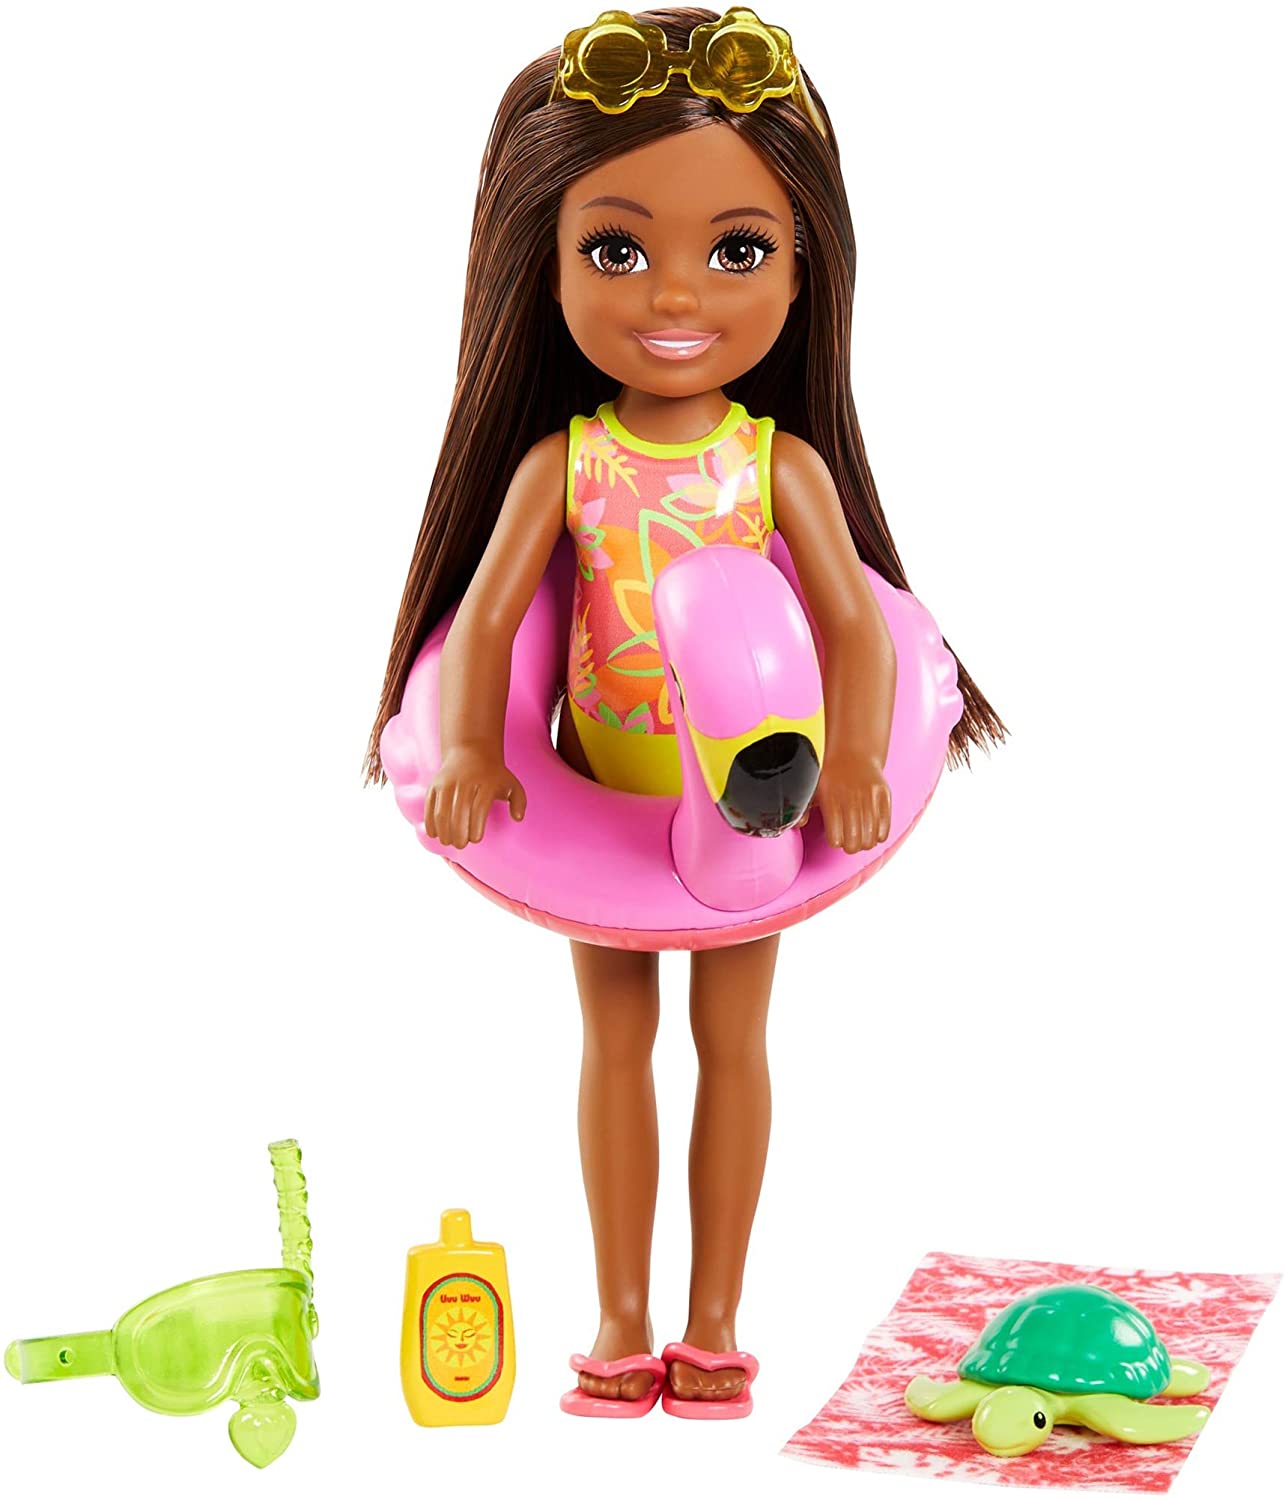 Barbie And Chelsea The Lost Birthday Playset With Chelsea Doll (Brunette, 6 In), Jungle Pet, Floatie And Accessories, Gift For 3 To 7 Year Olds, Toys & Games